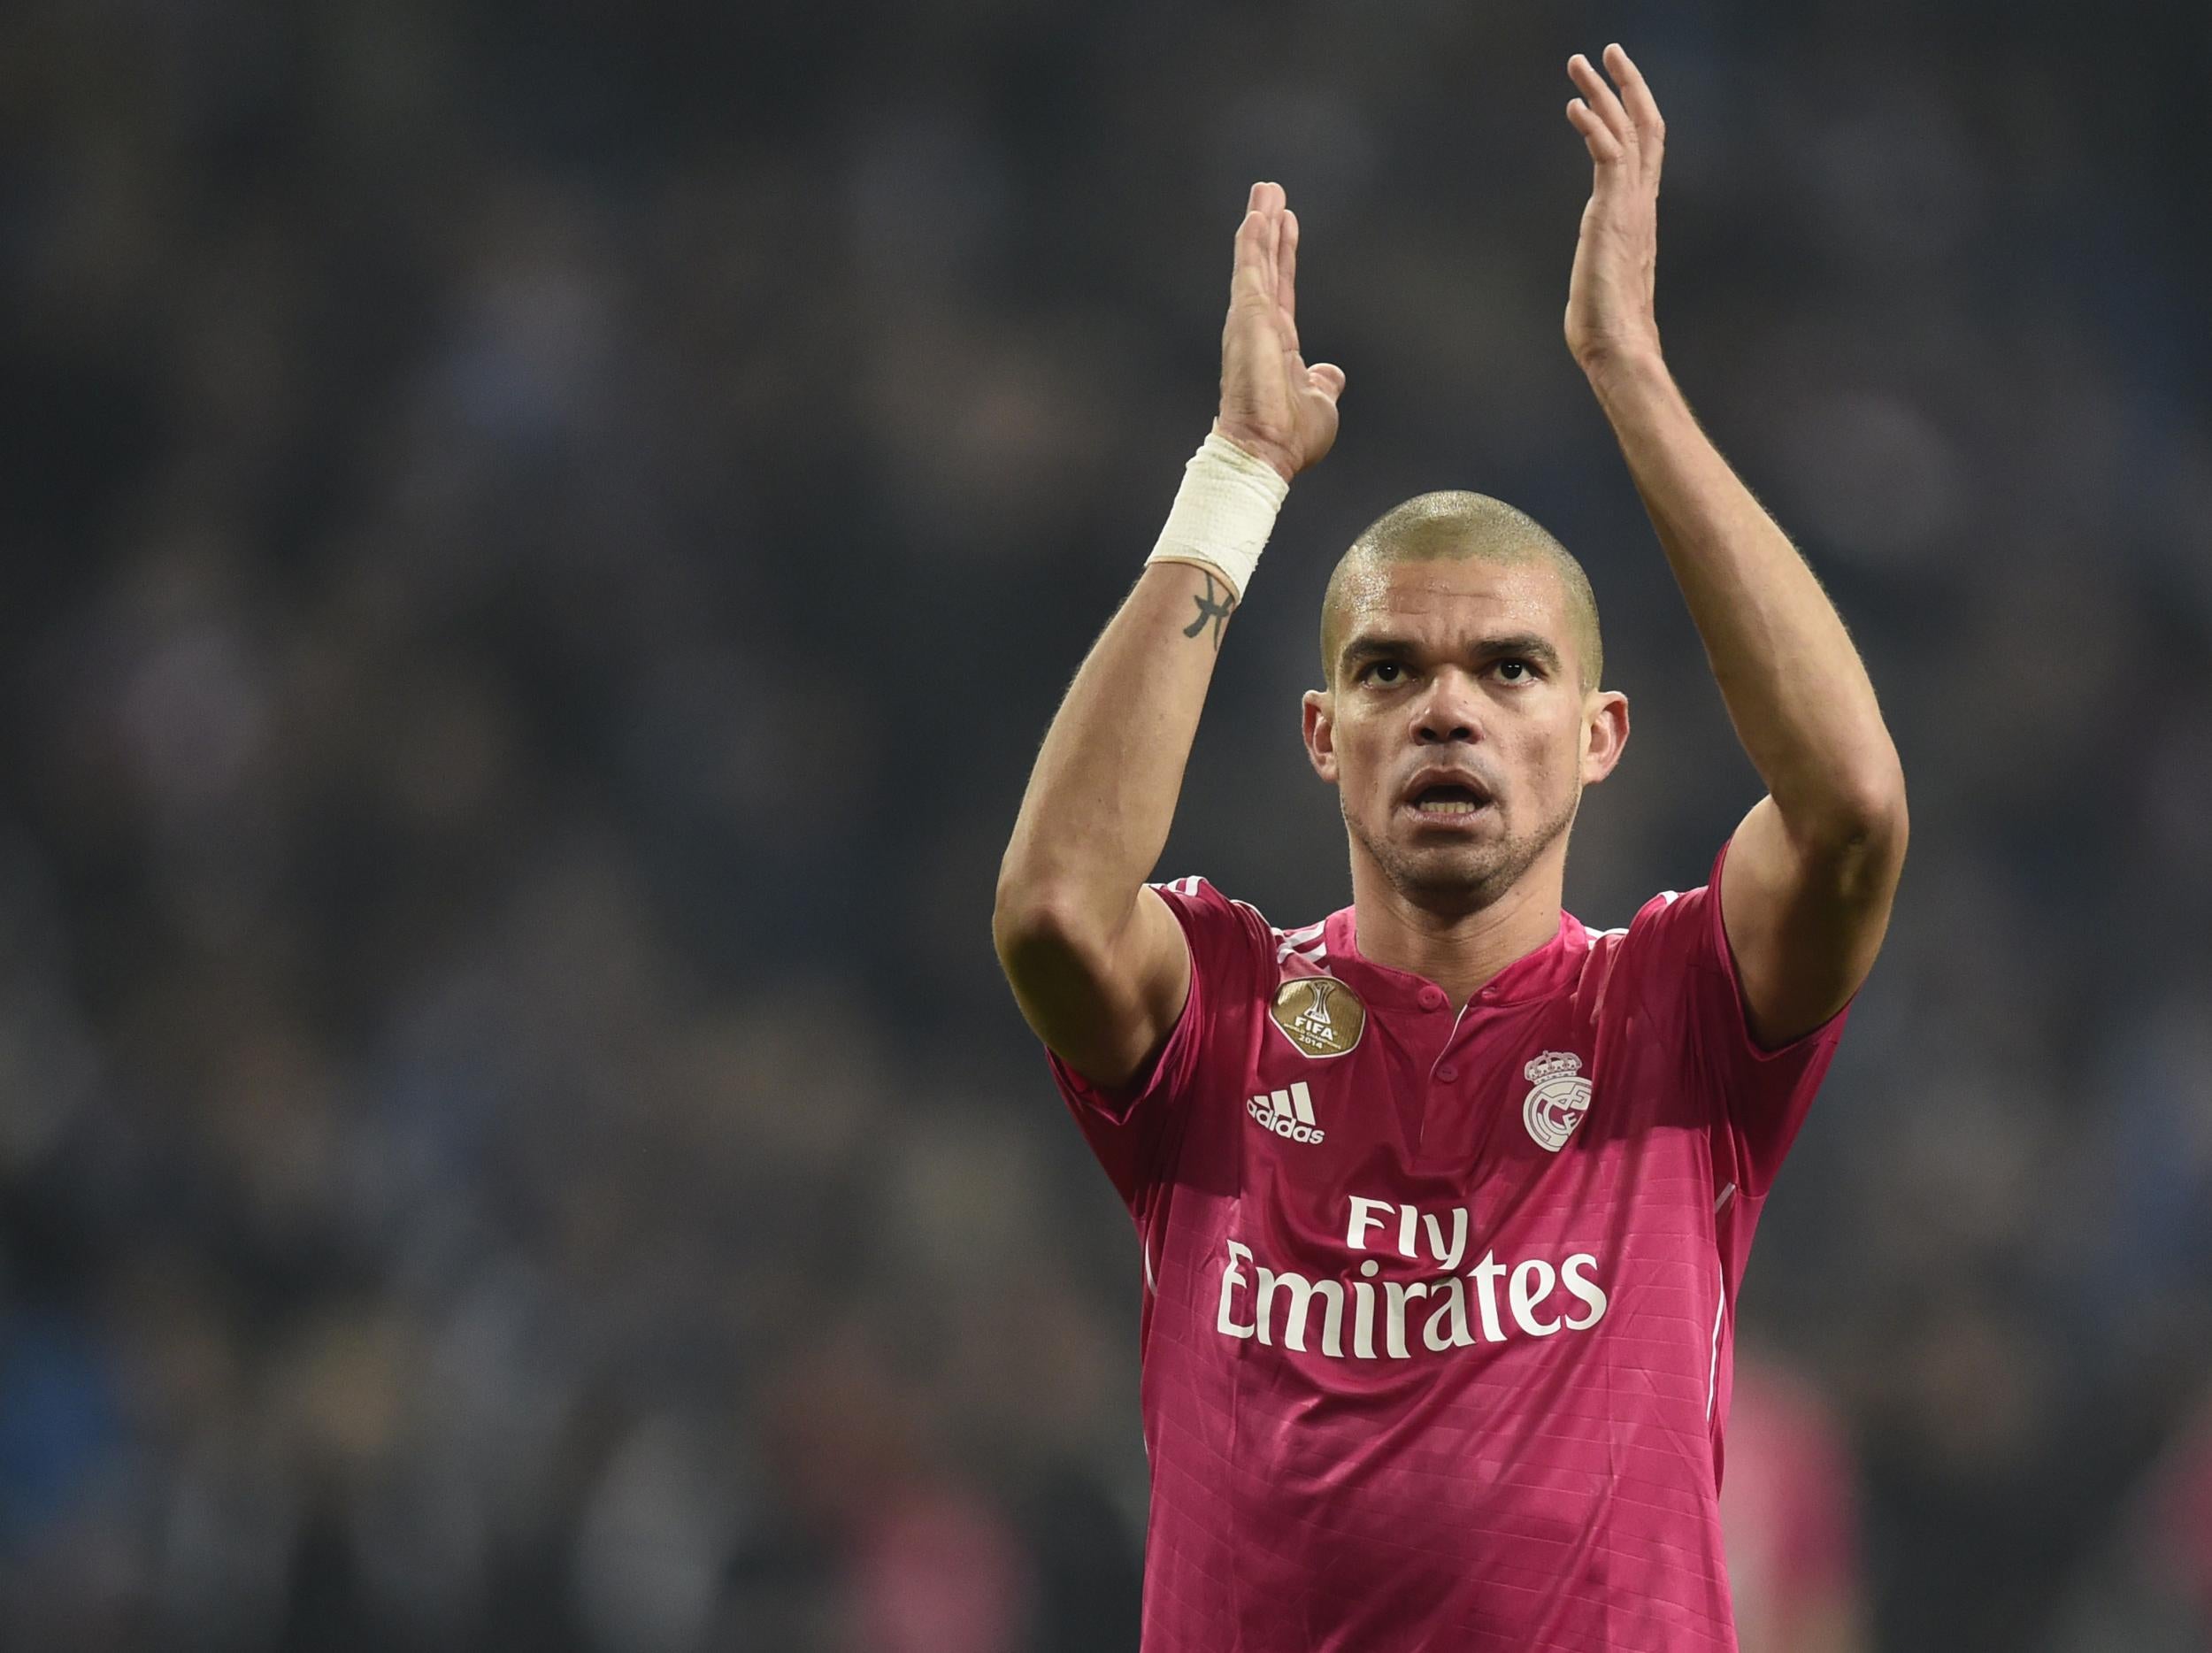 Pepe has played for the European champions for a decade